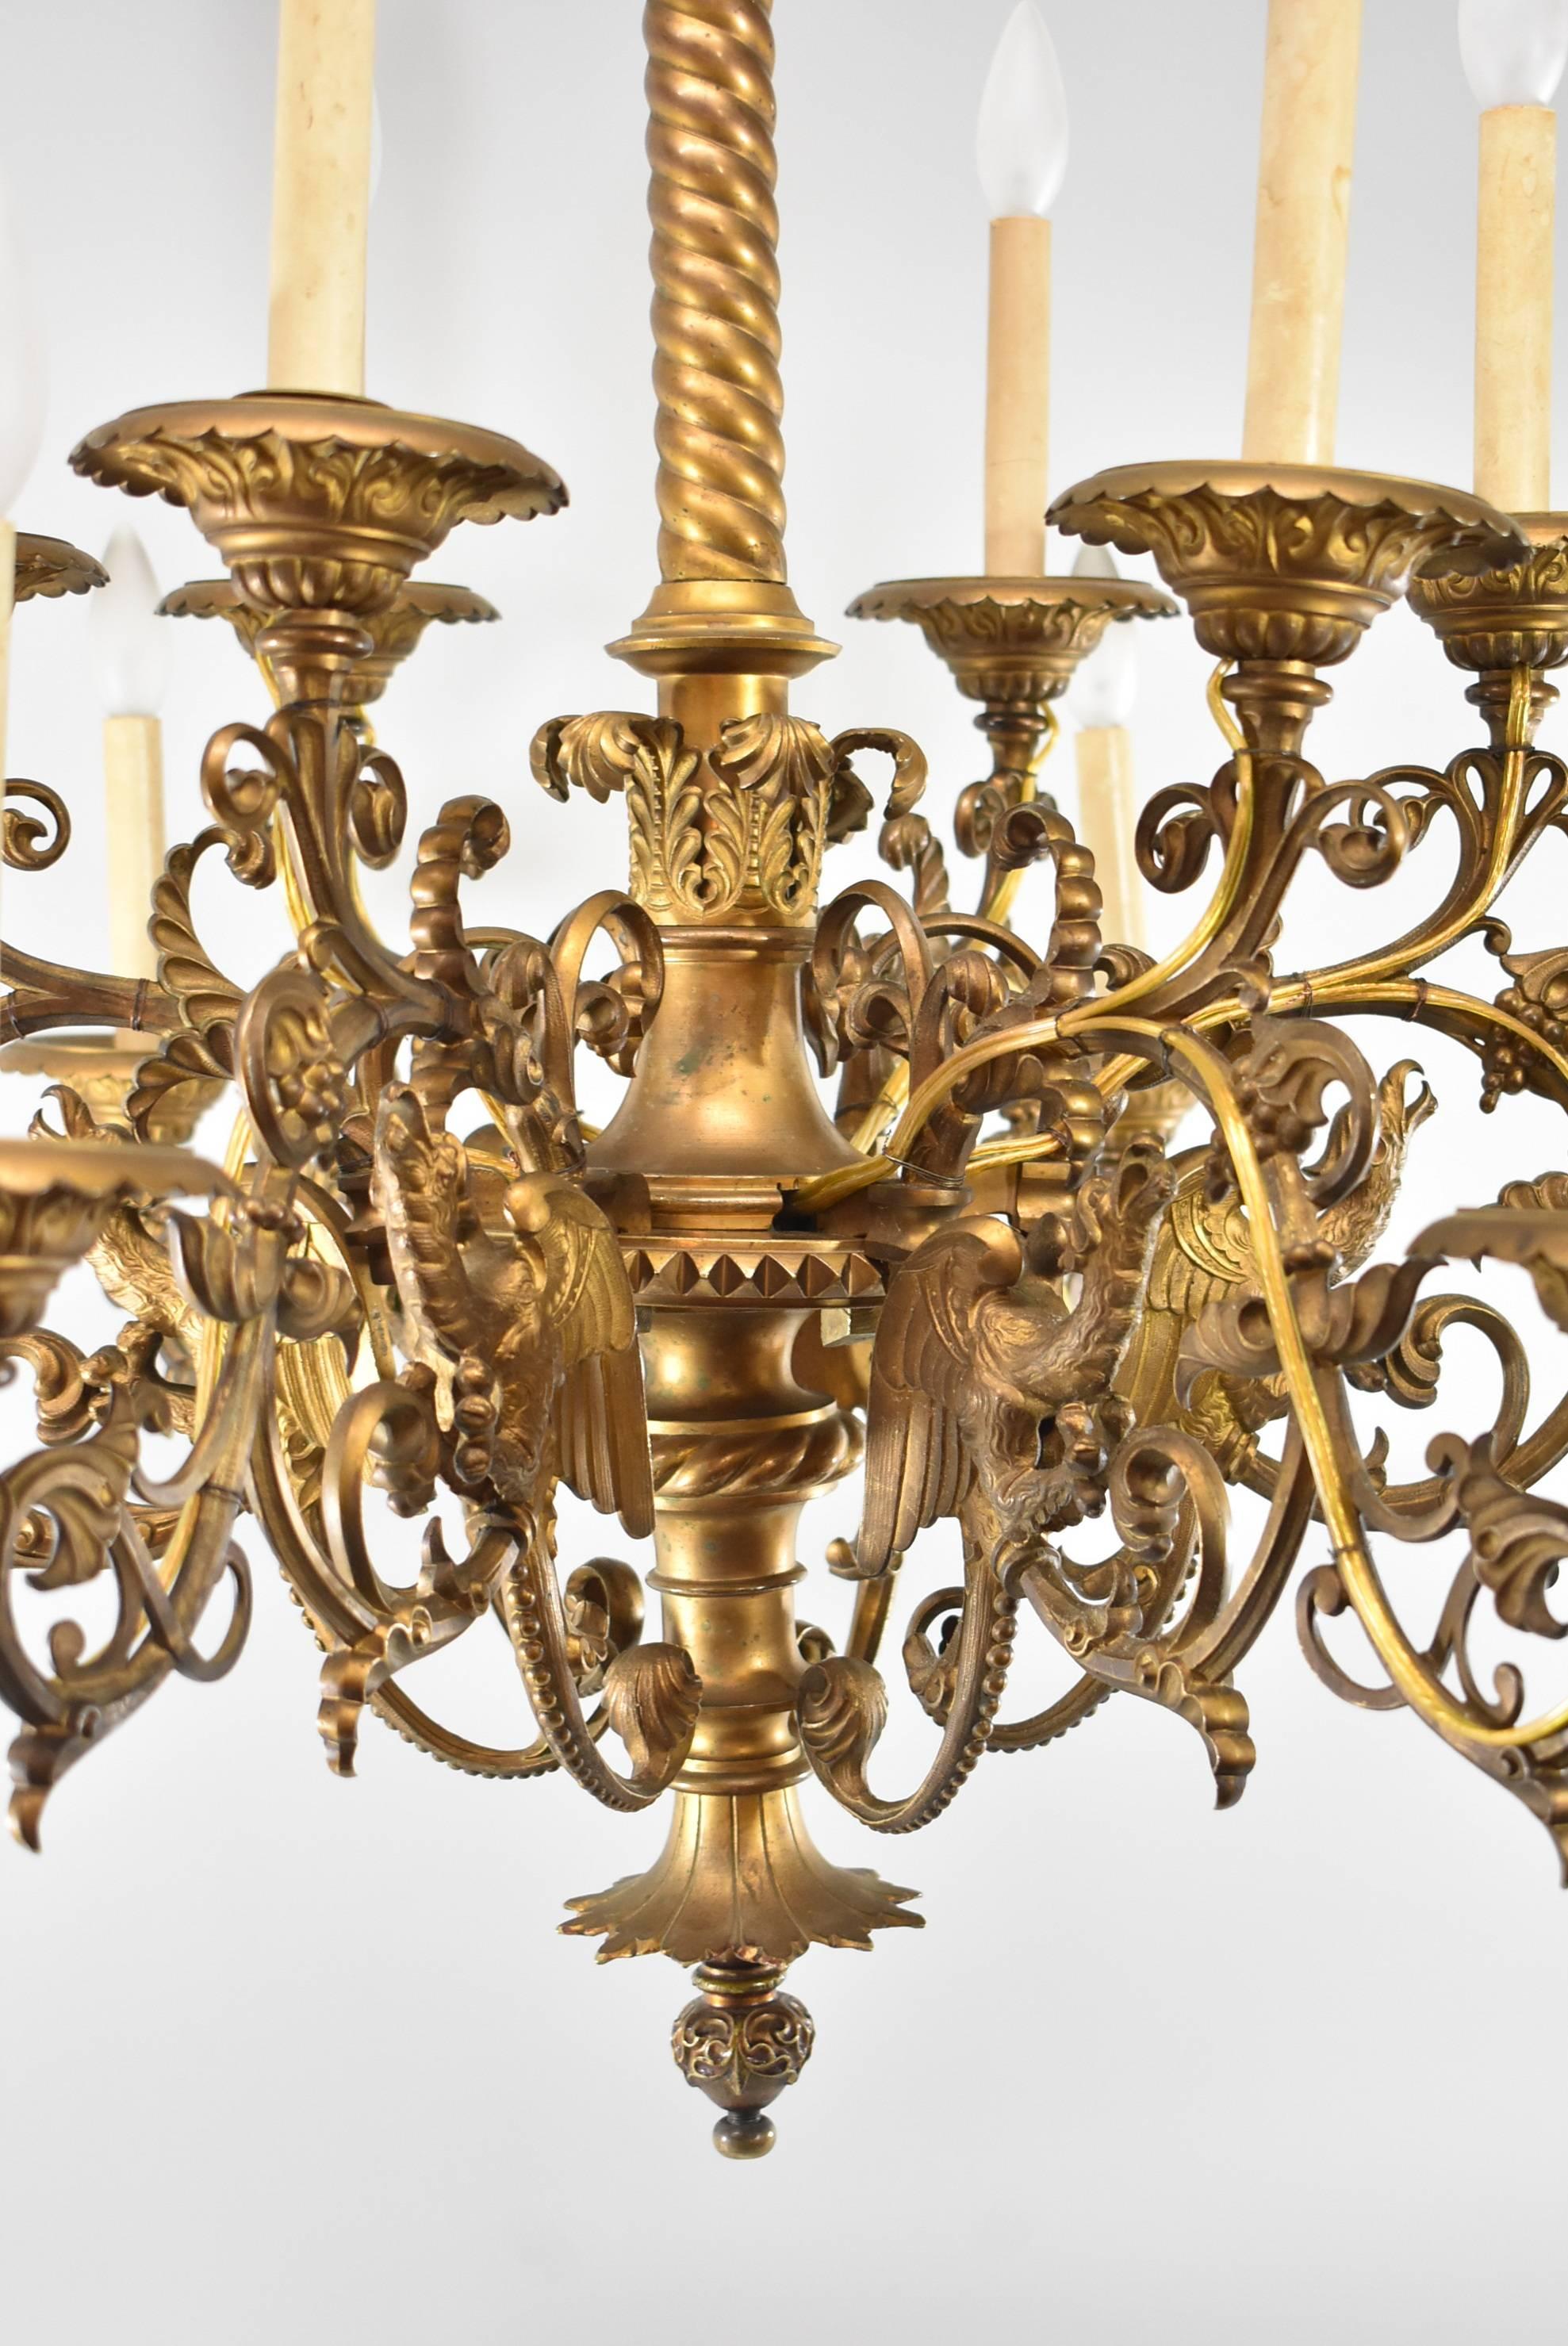 Large Gothic / Rococo Bronze Six-Arm 12-Light Chandelier with Mythical Bird For Sale 2